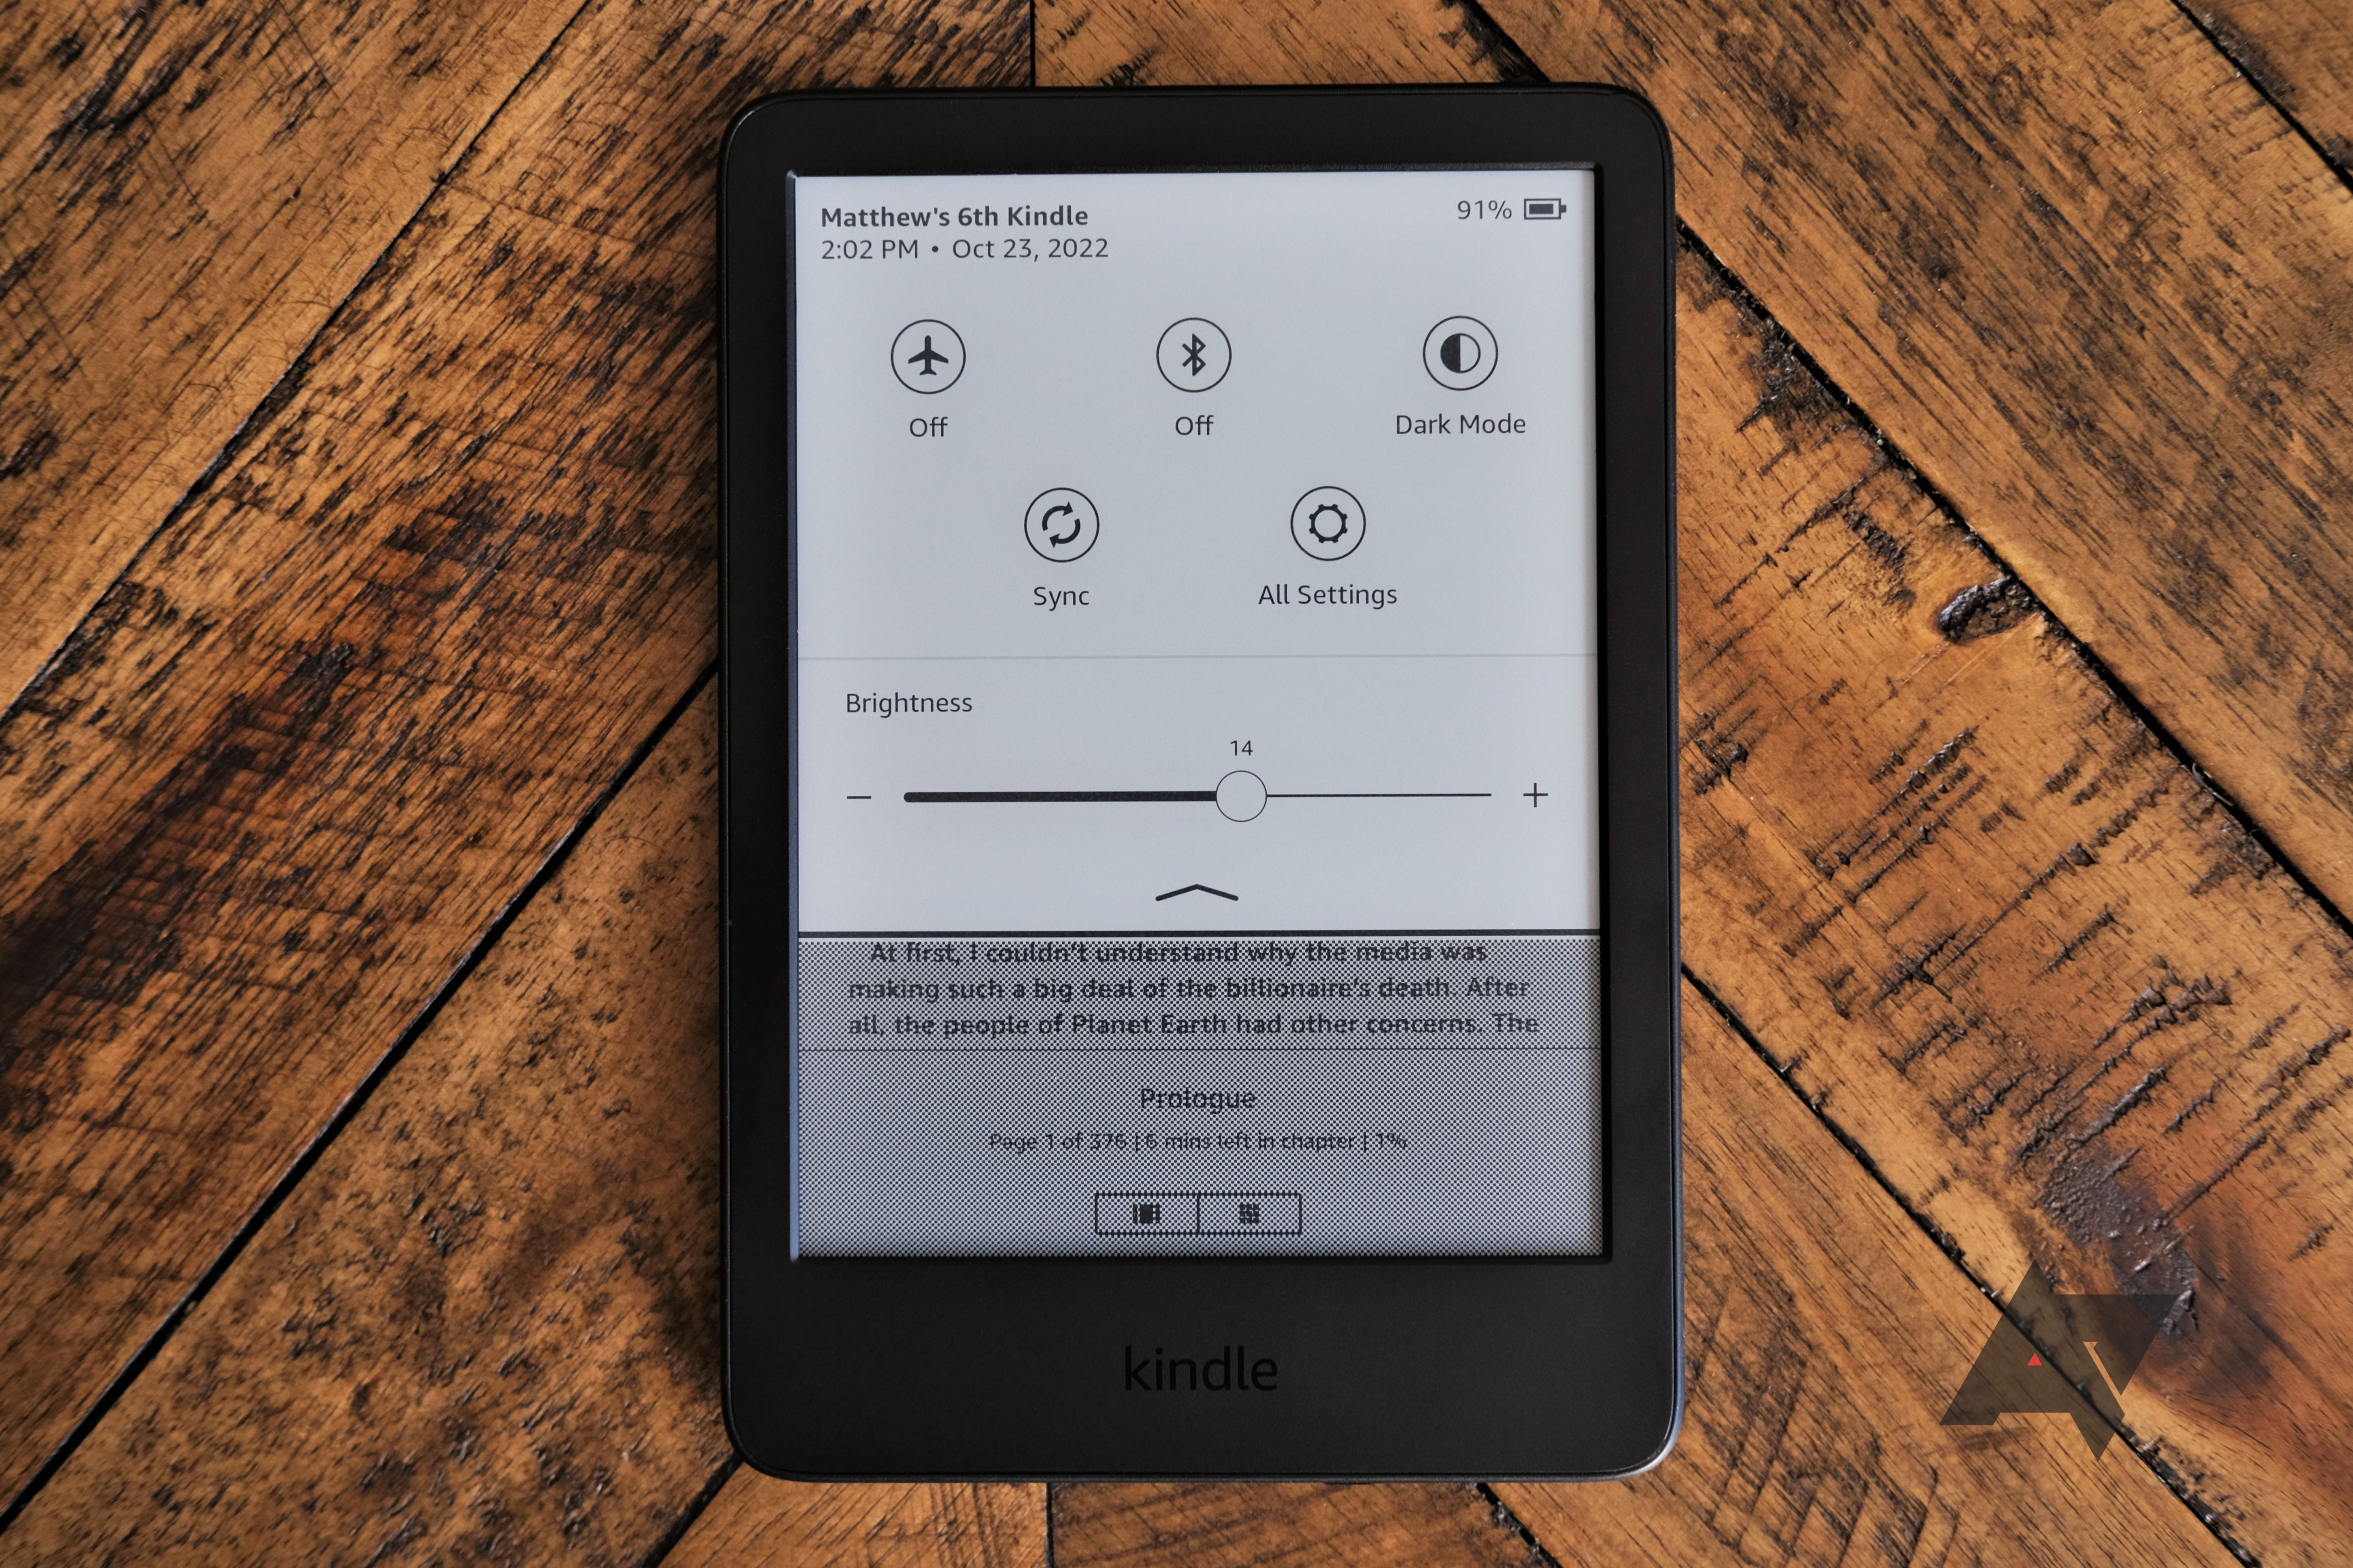 All-New Kindle Paperwhite (10th Gen) - 6 High Resolution Display